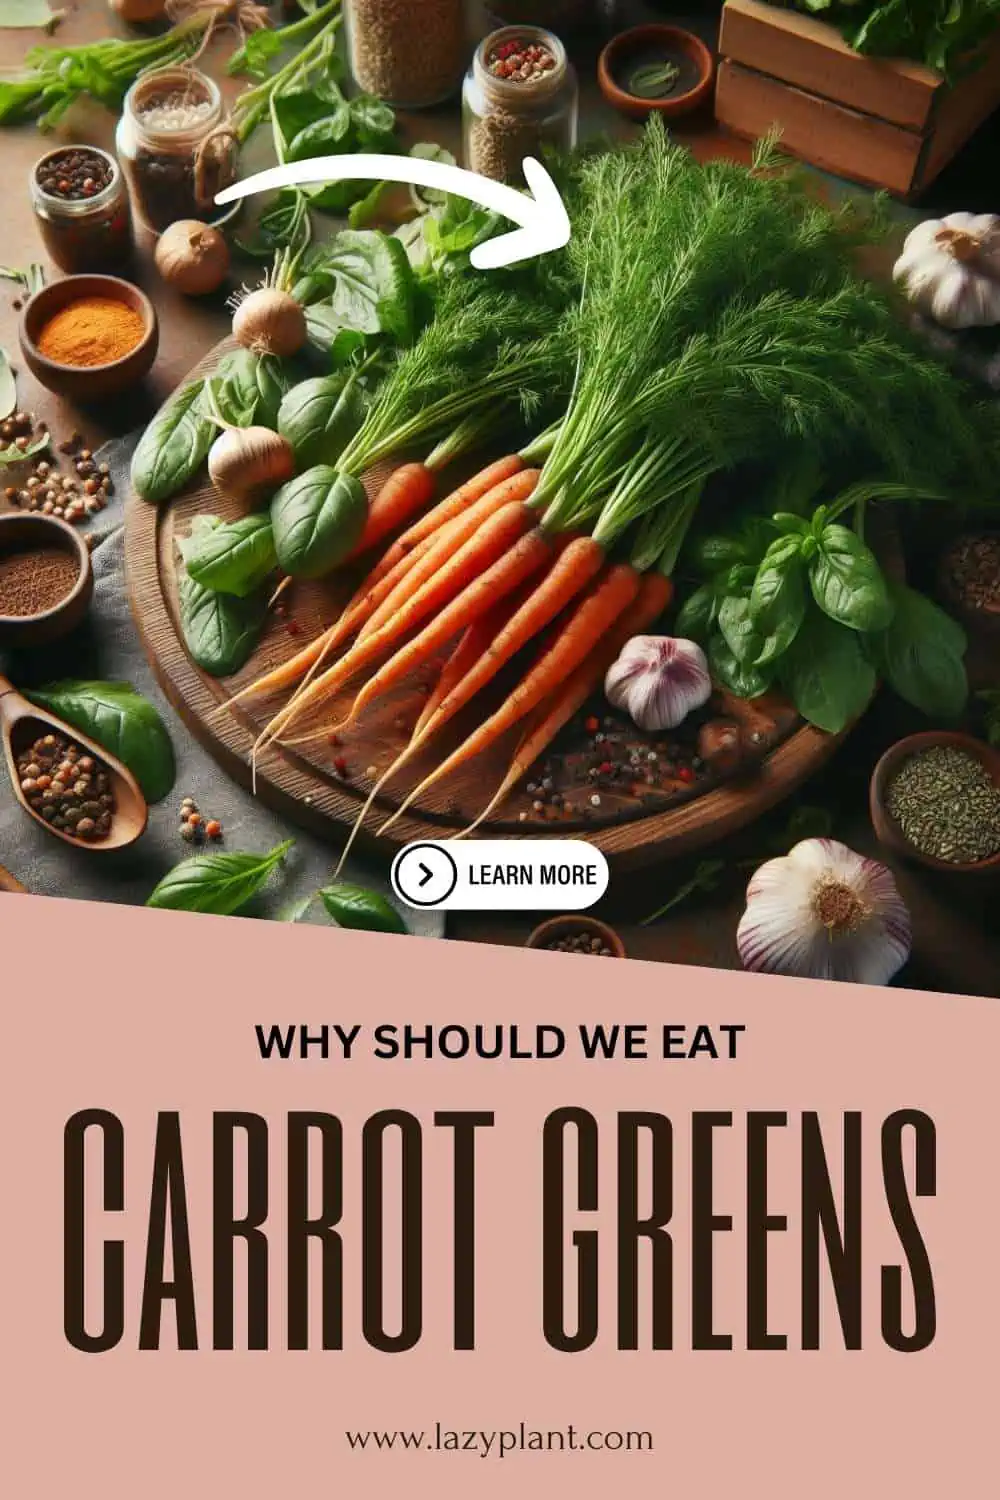 Why should I eat carrot greens?